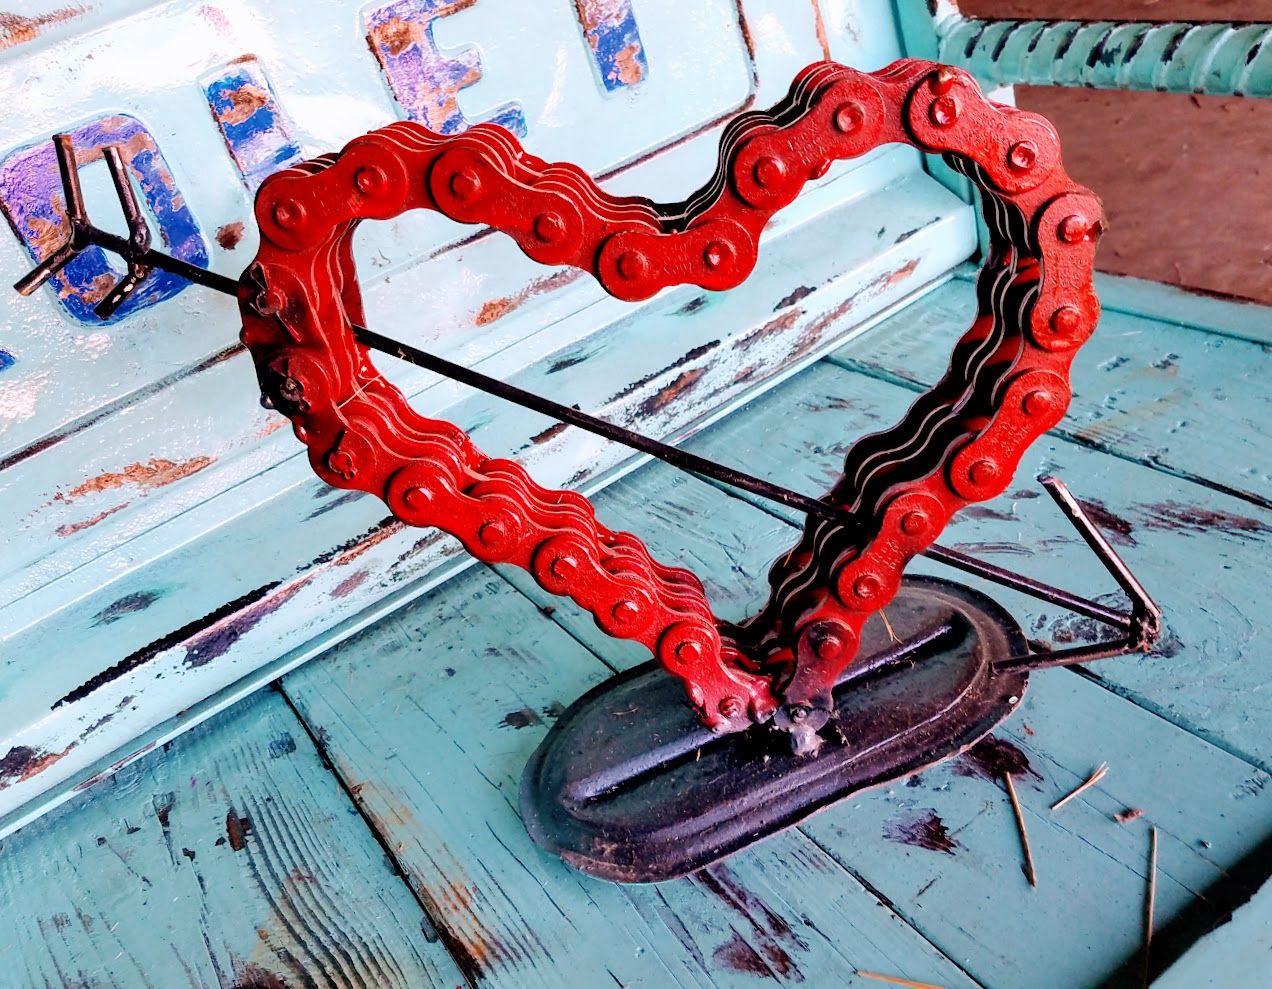 Buy Hand Crafted Welded Chain Art Metal Heart And Arrow Decoration, made to  order from Metal Art at Recycled Salvage Design